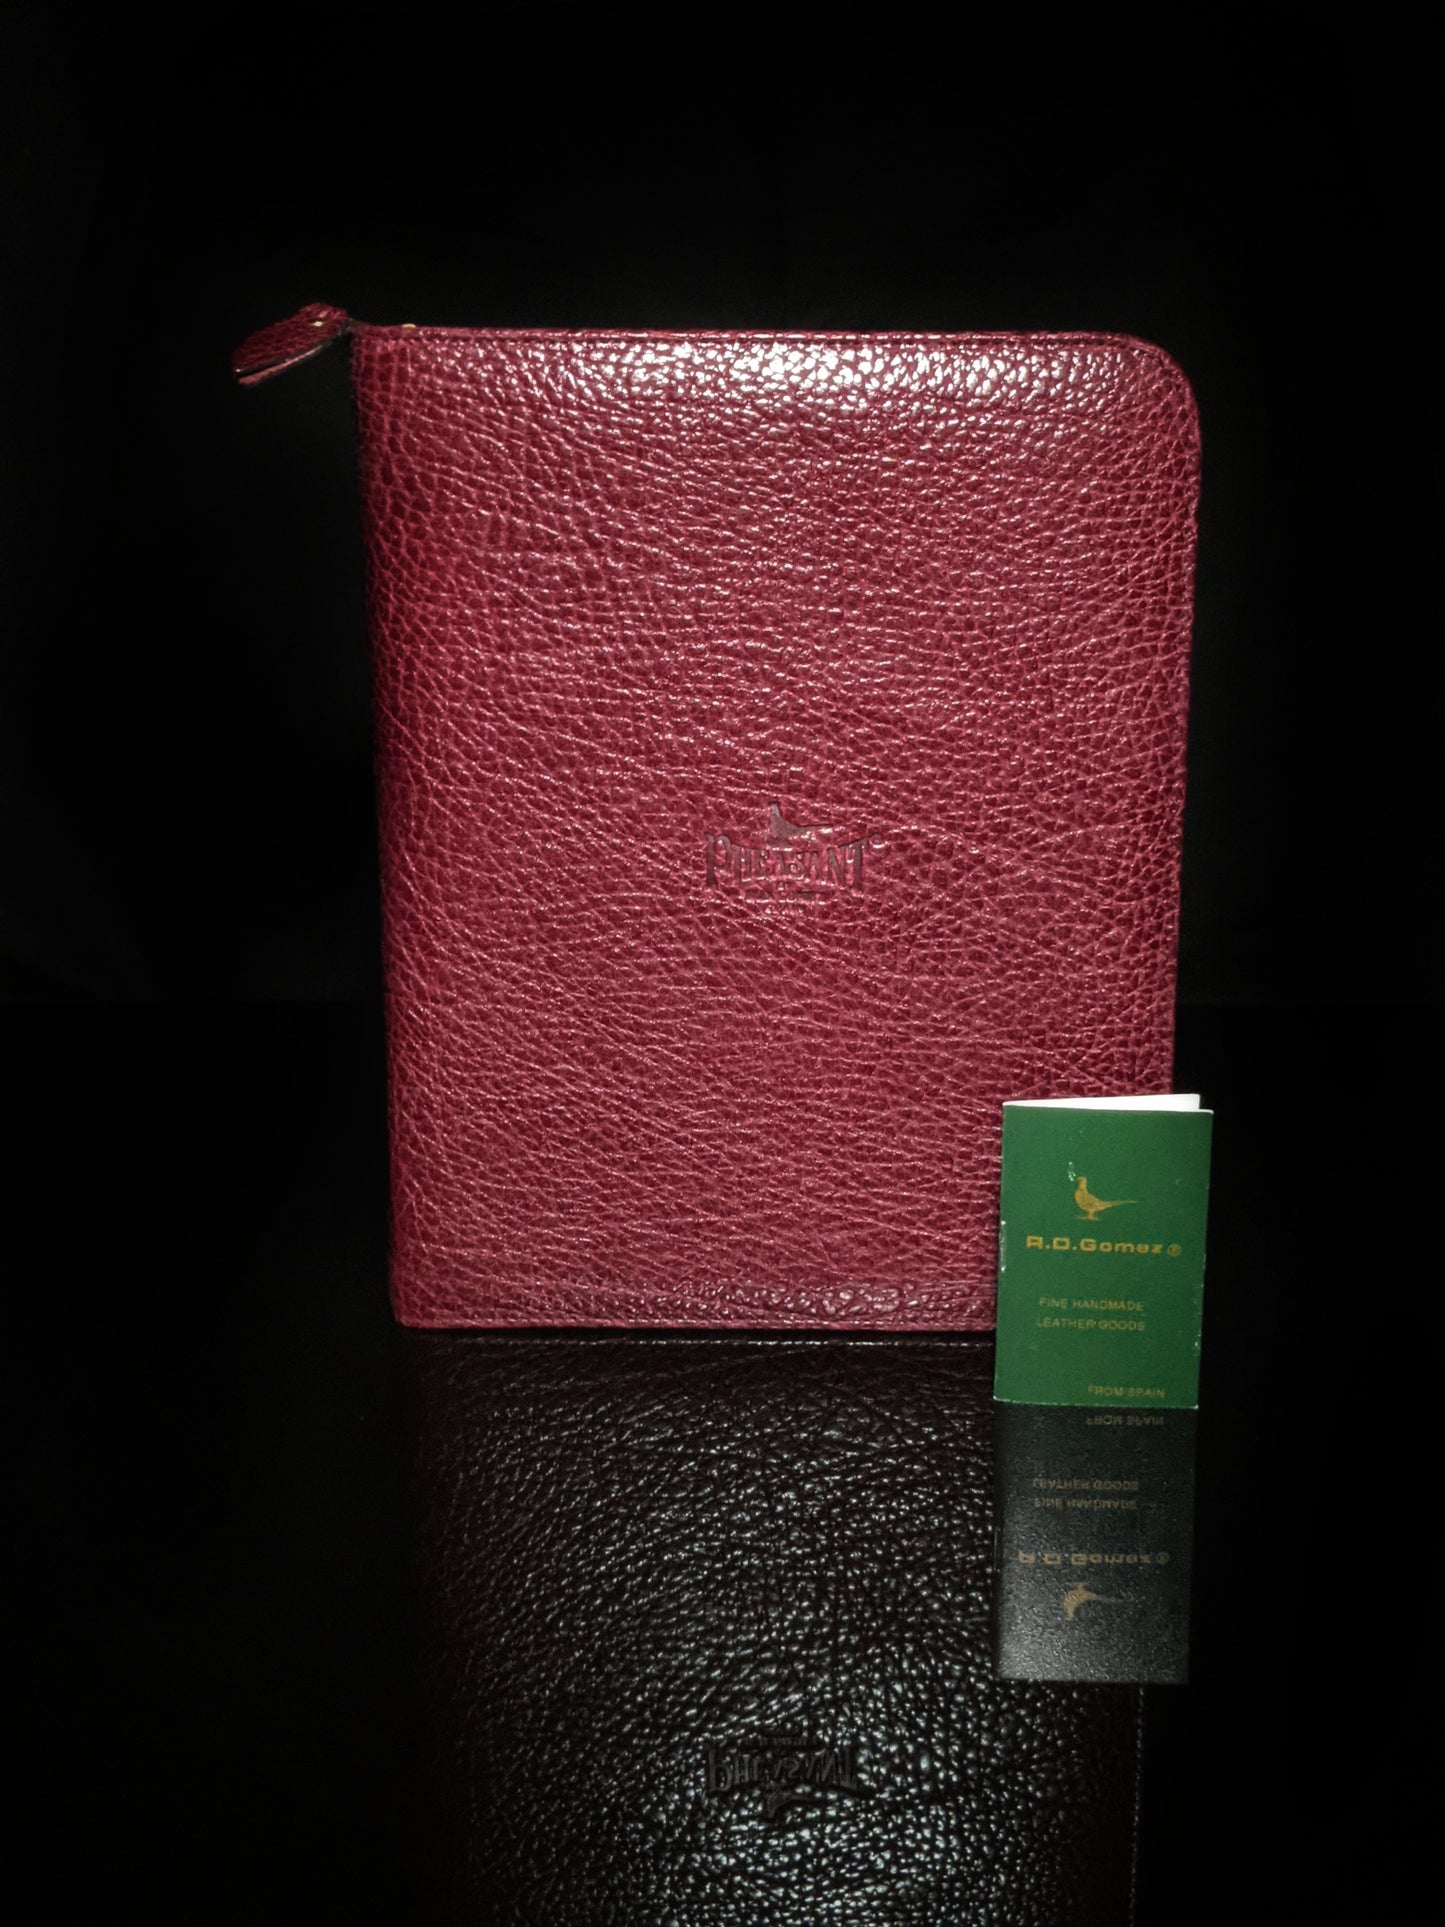 pheasant by R.D.Gomez made in Spain Bordeaux  Leather  Case NIB